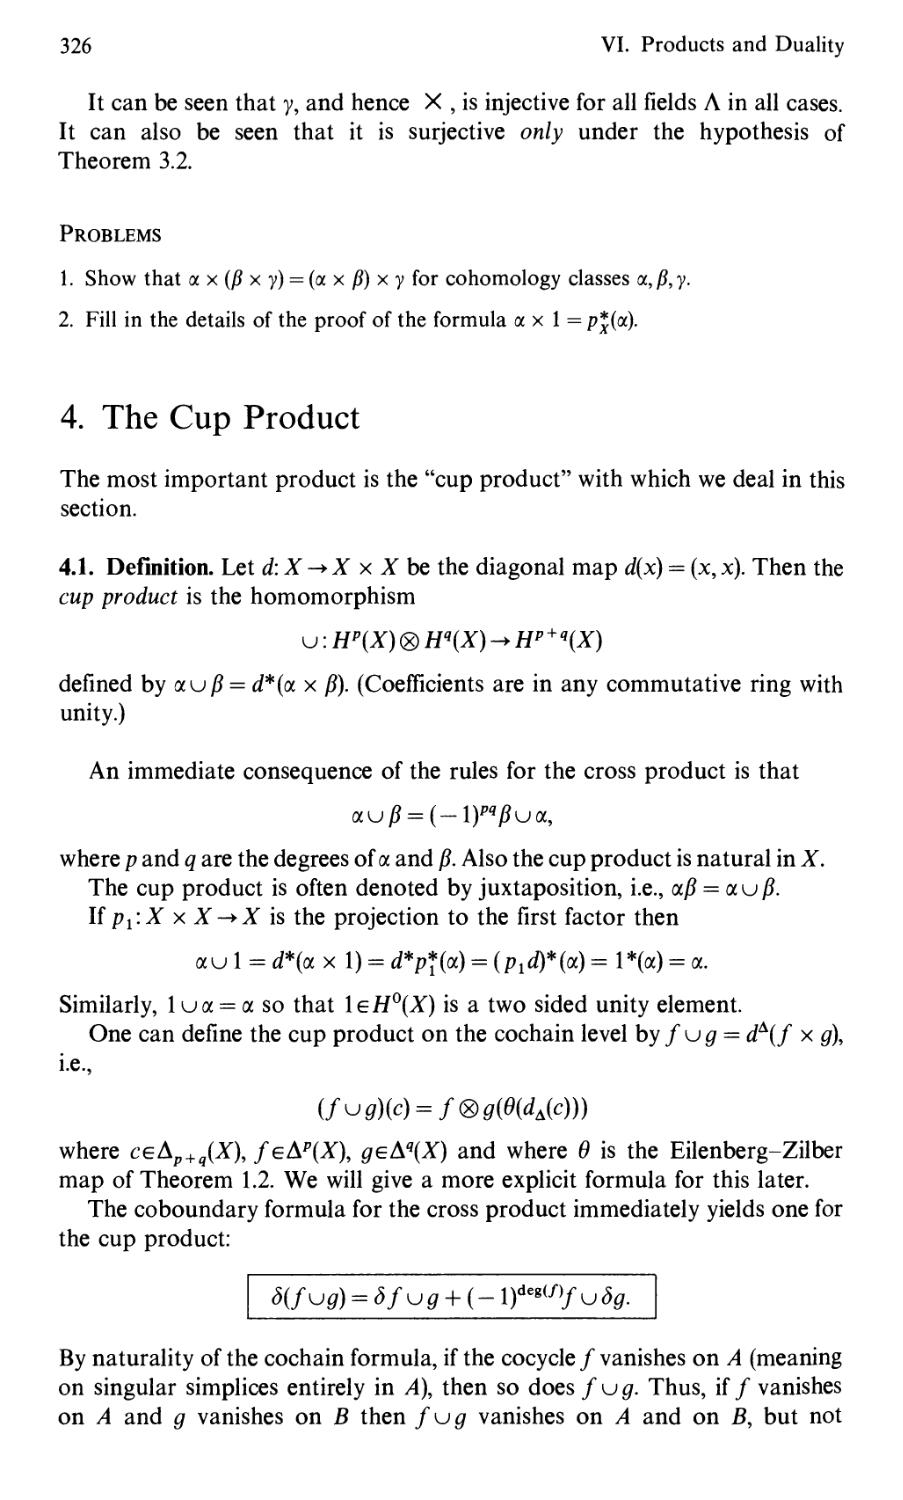 4. The Cup Product